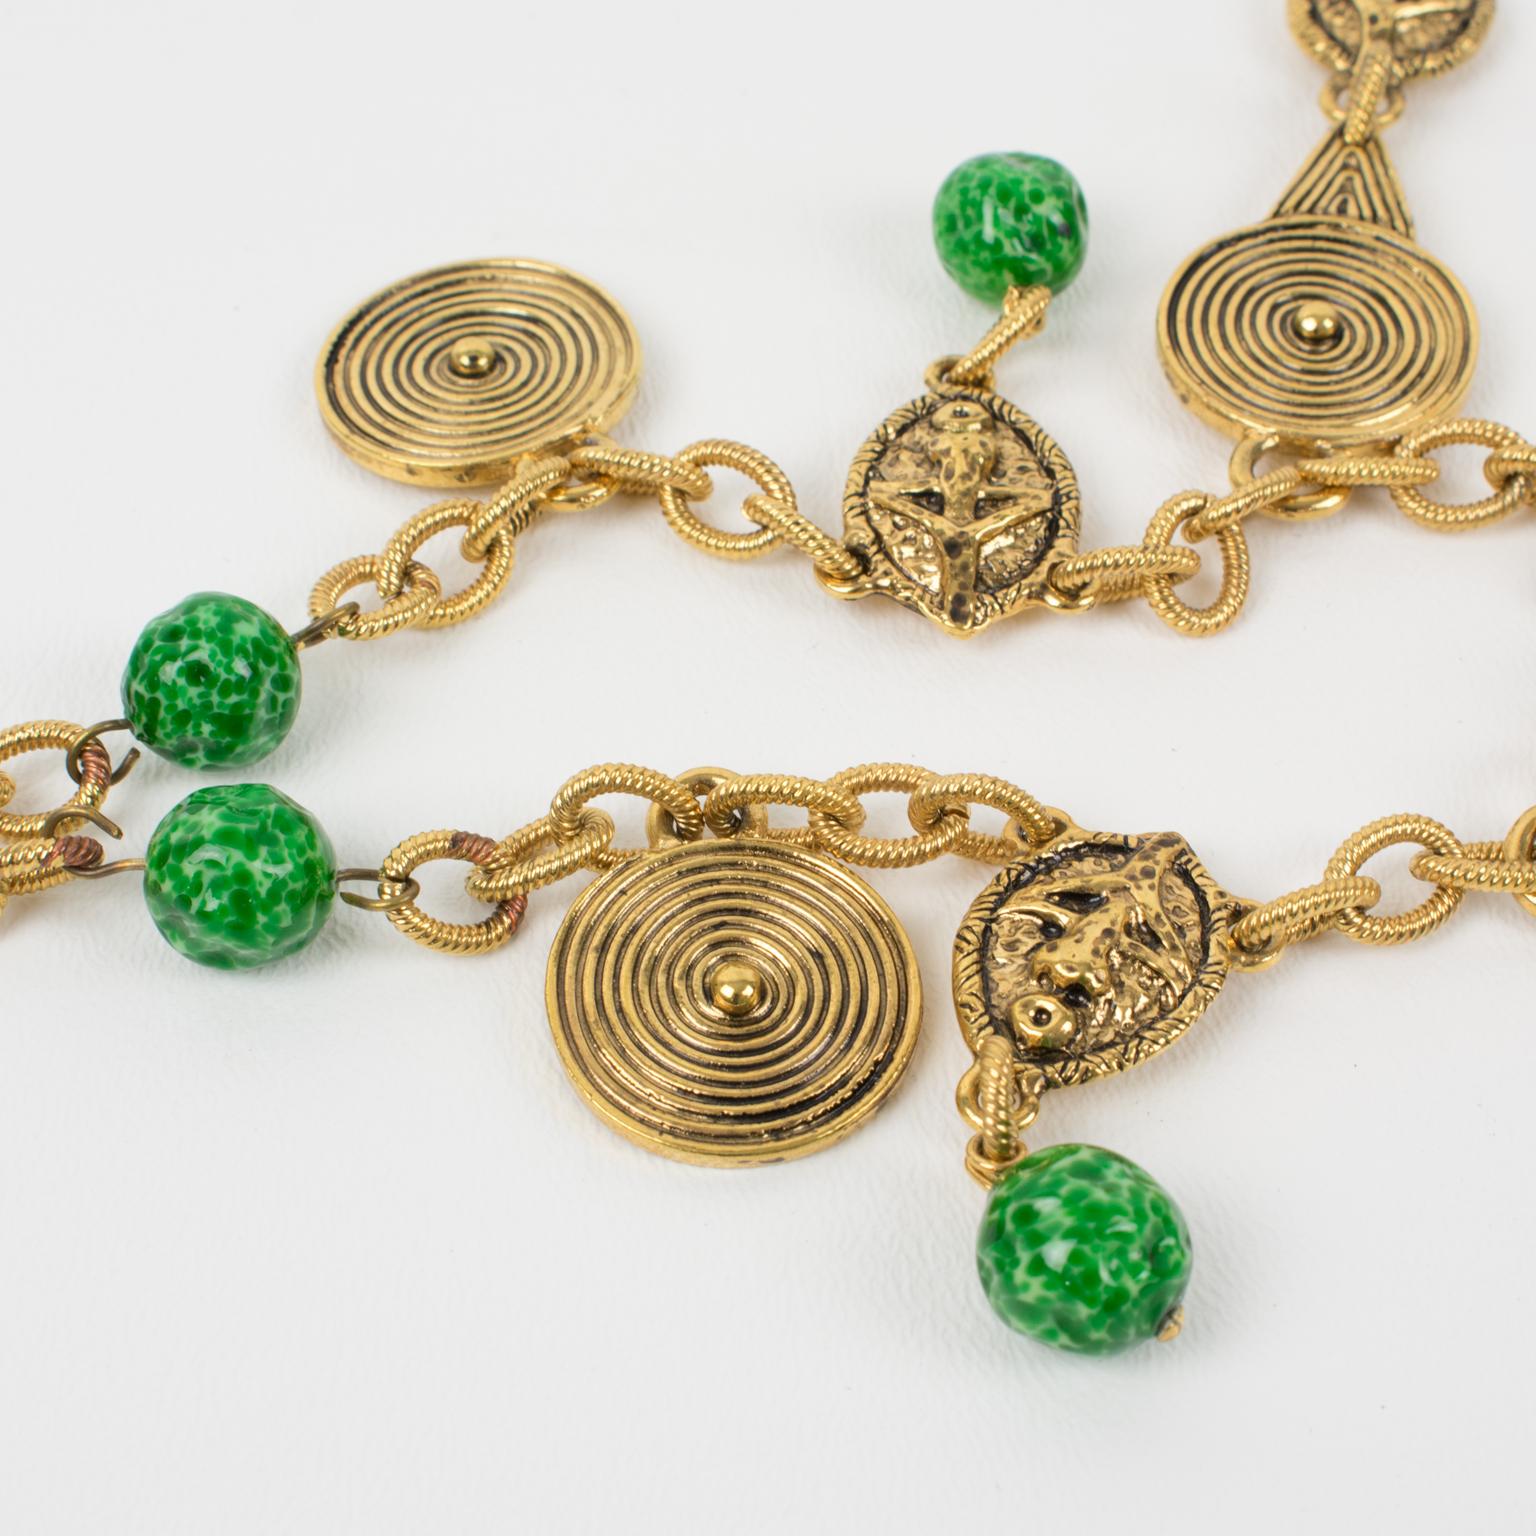 Guy Laroche Tribal-Inspired Gilt Metal Choker Necklace with Green Ceramic Beads In Excellent Condition For Sale In Atlanta, GA